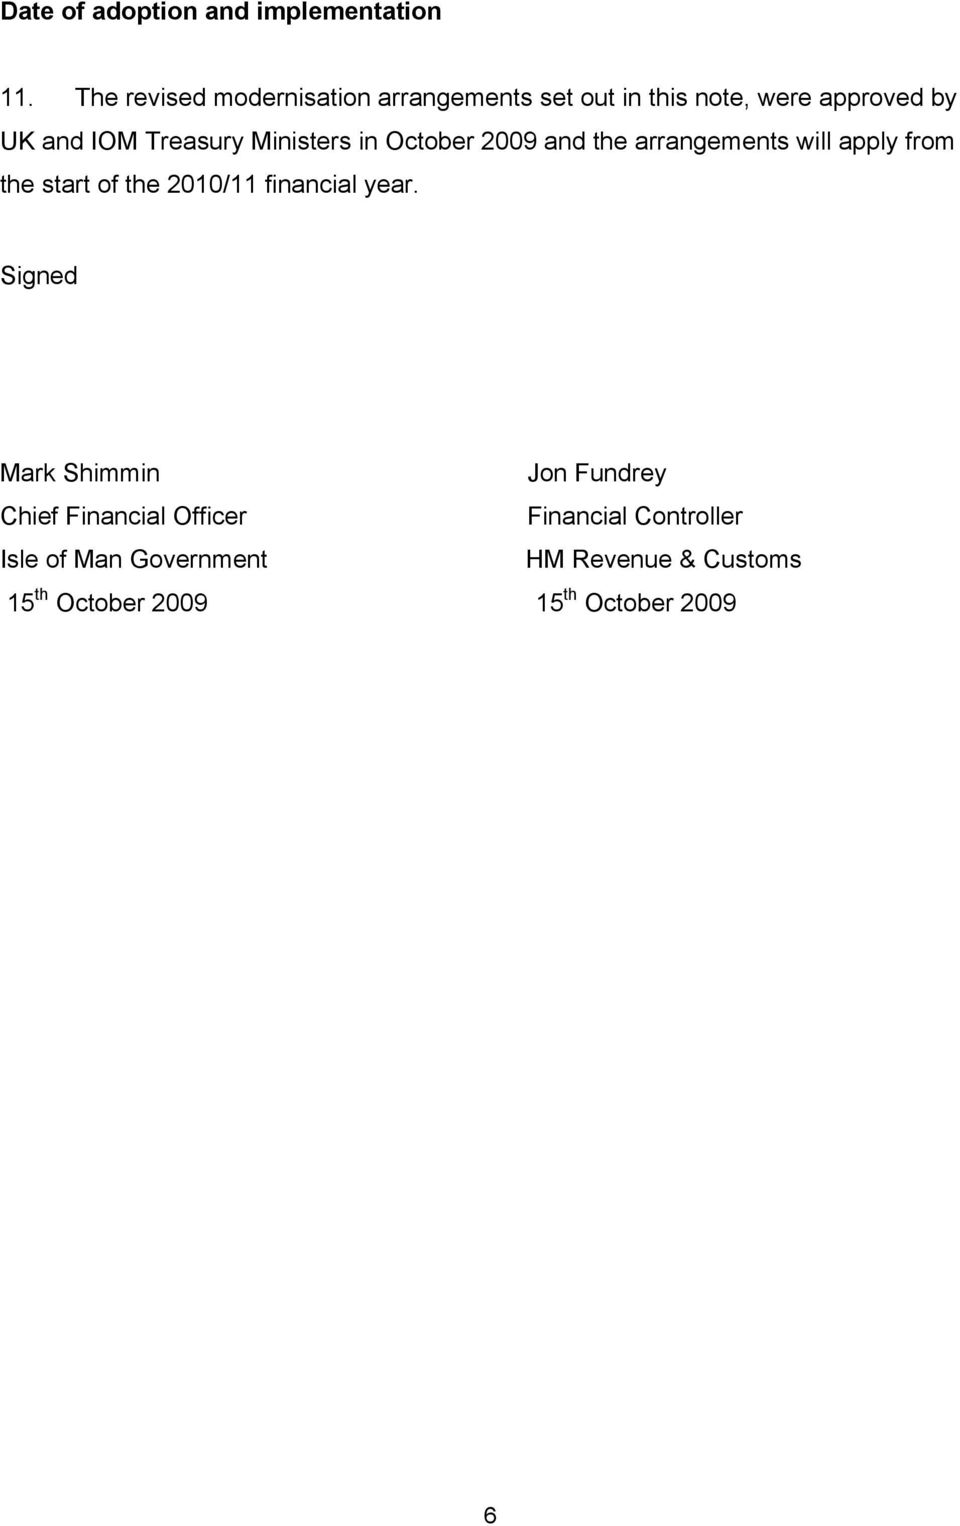 Ministers in October 2009 and the arrangements will apply from the start of the 2010/11 financial